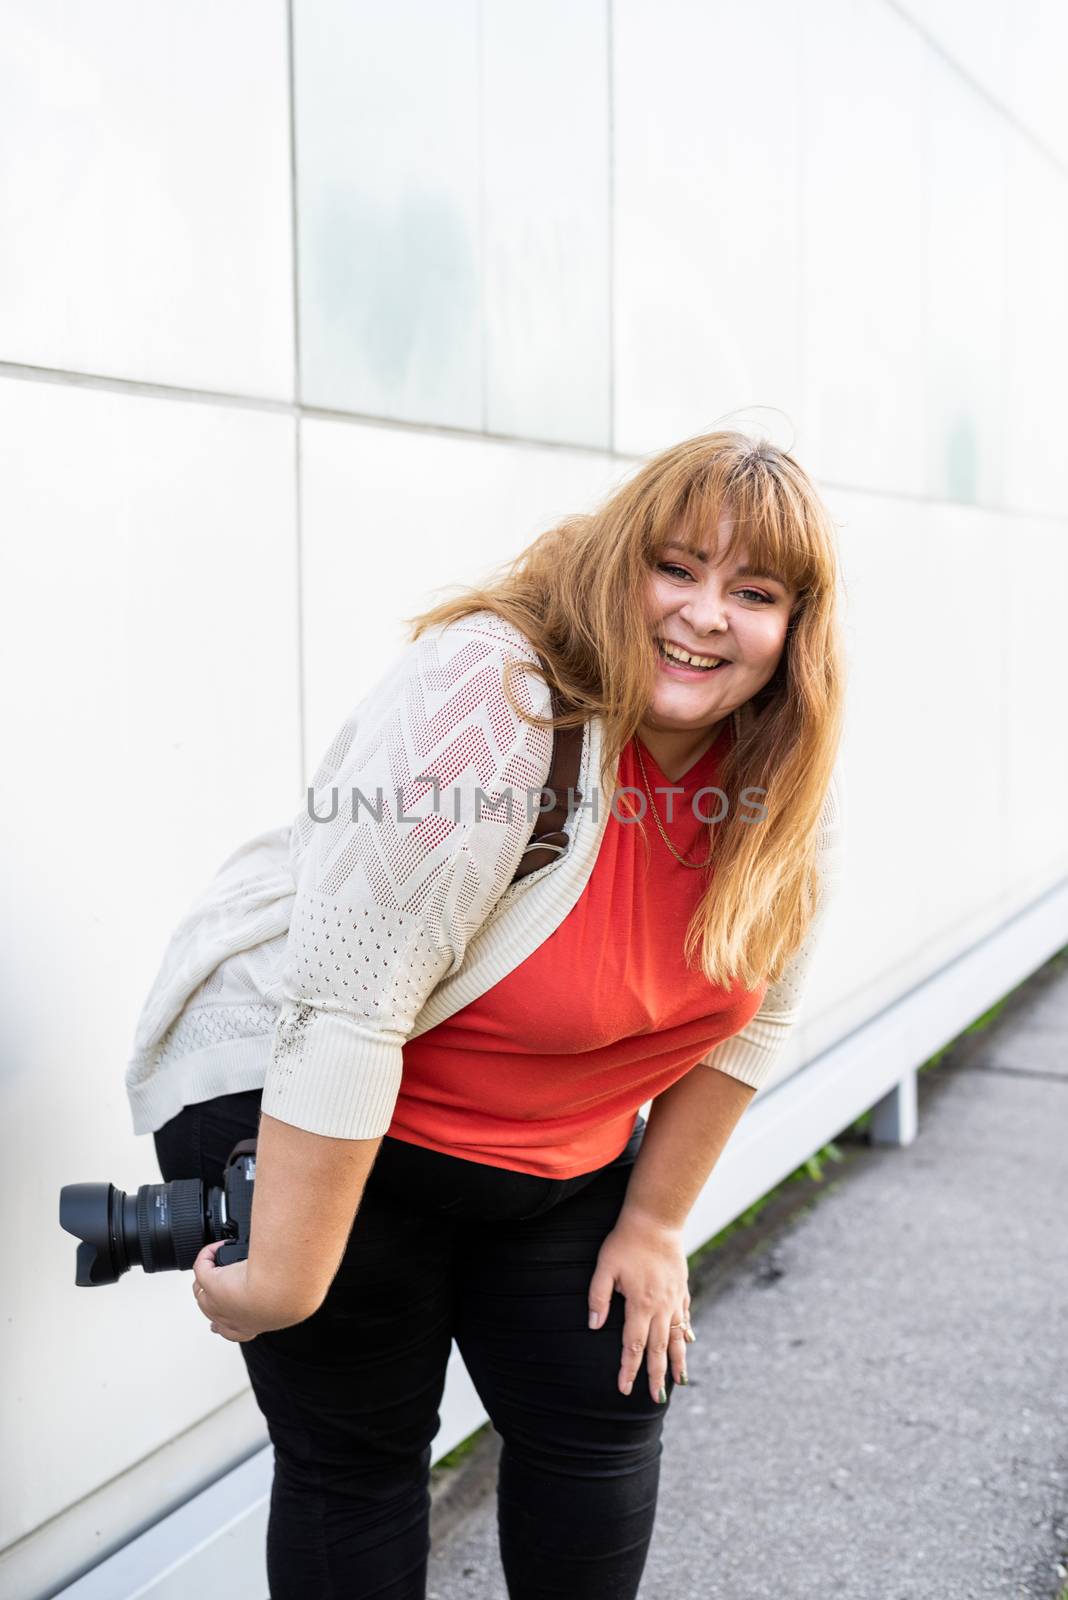 Portrait of overweight woman taking pictures with a camera outdoors by Desperada